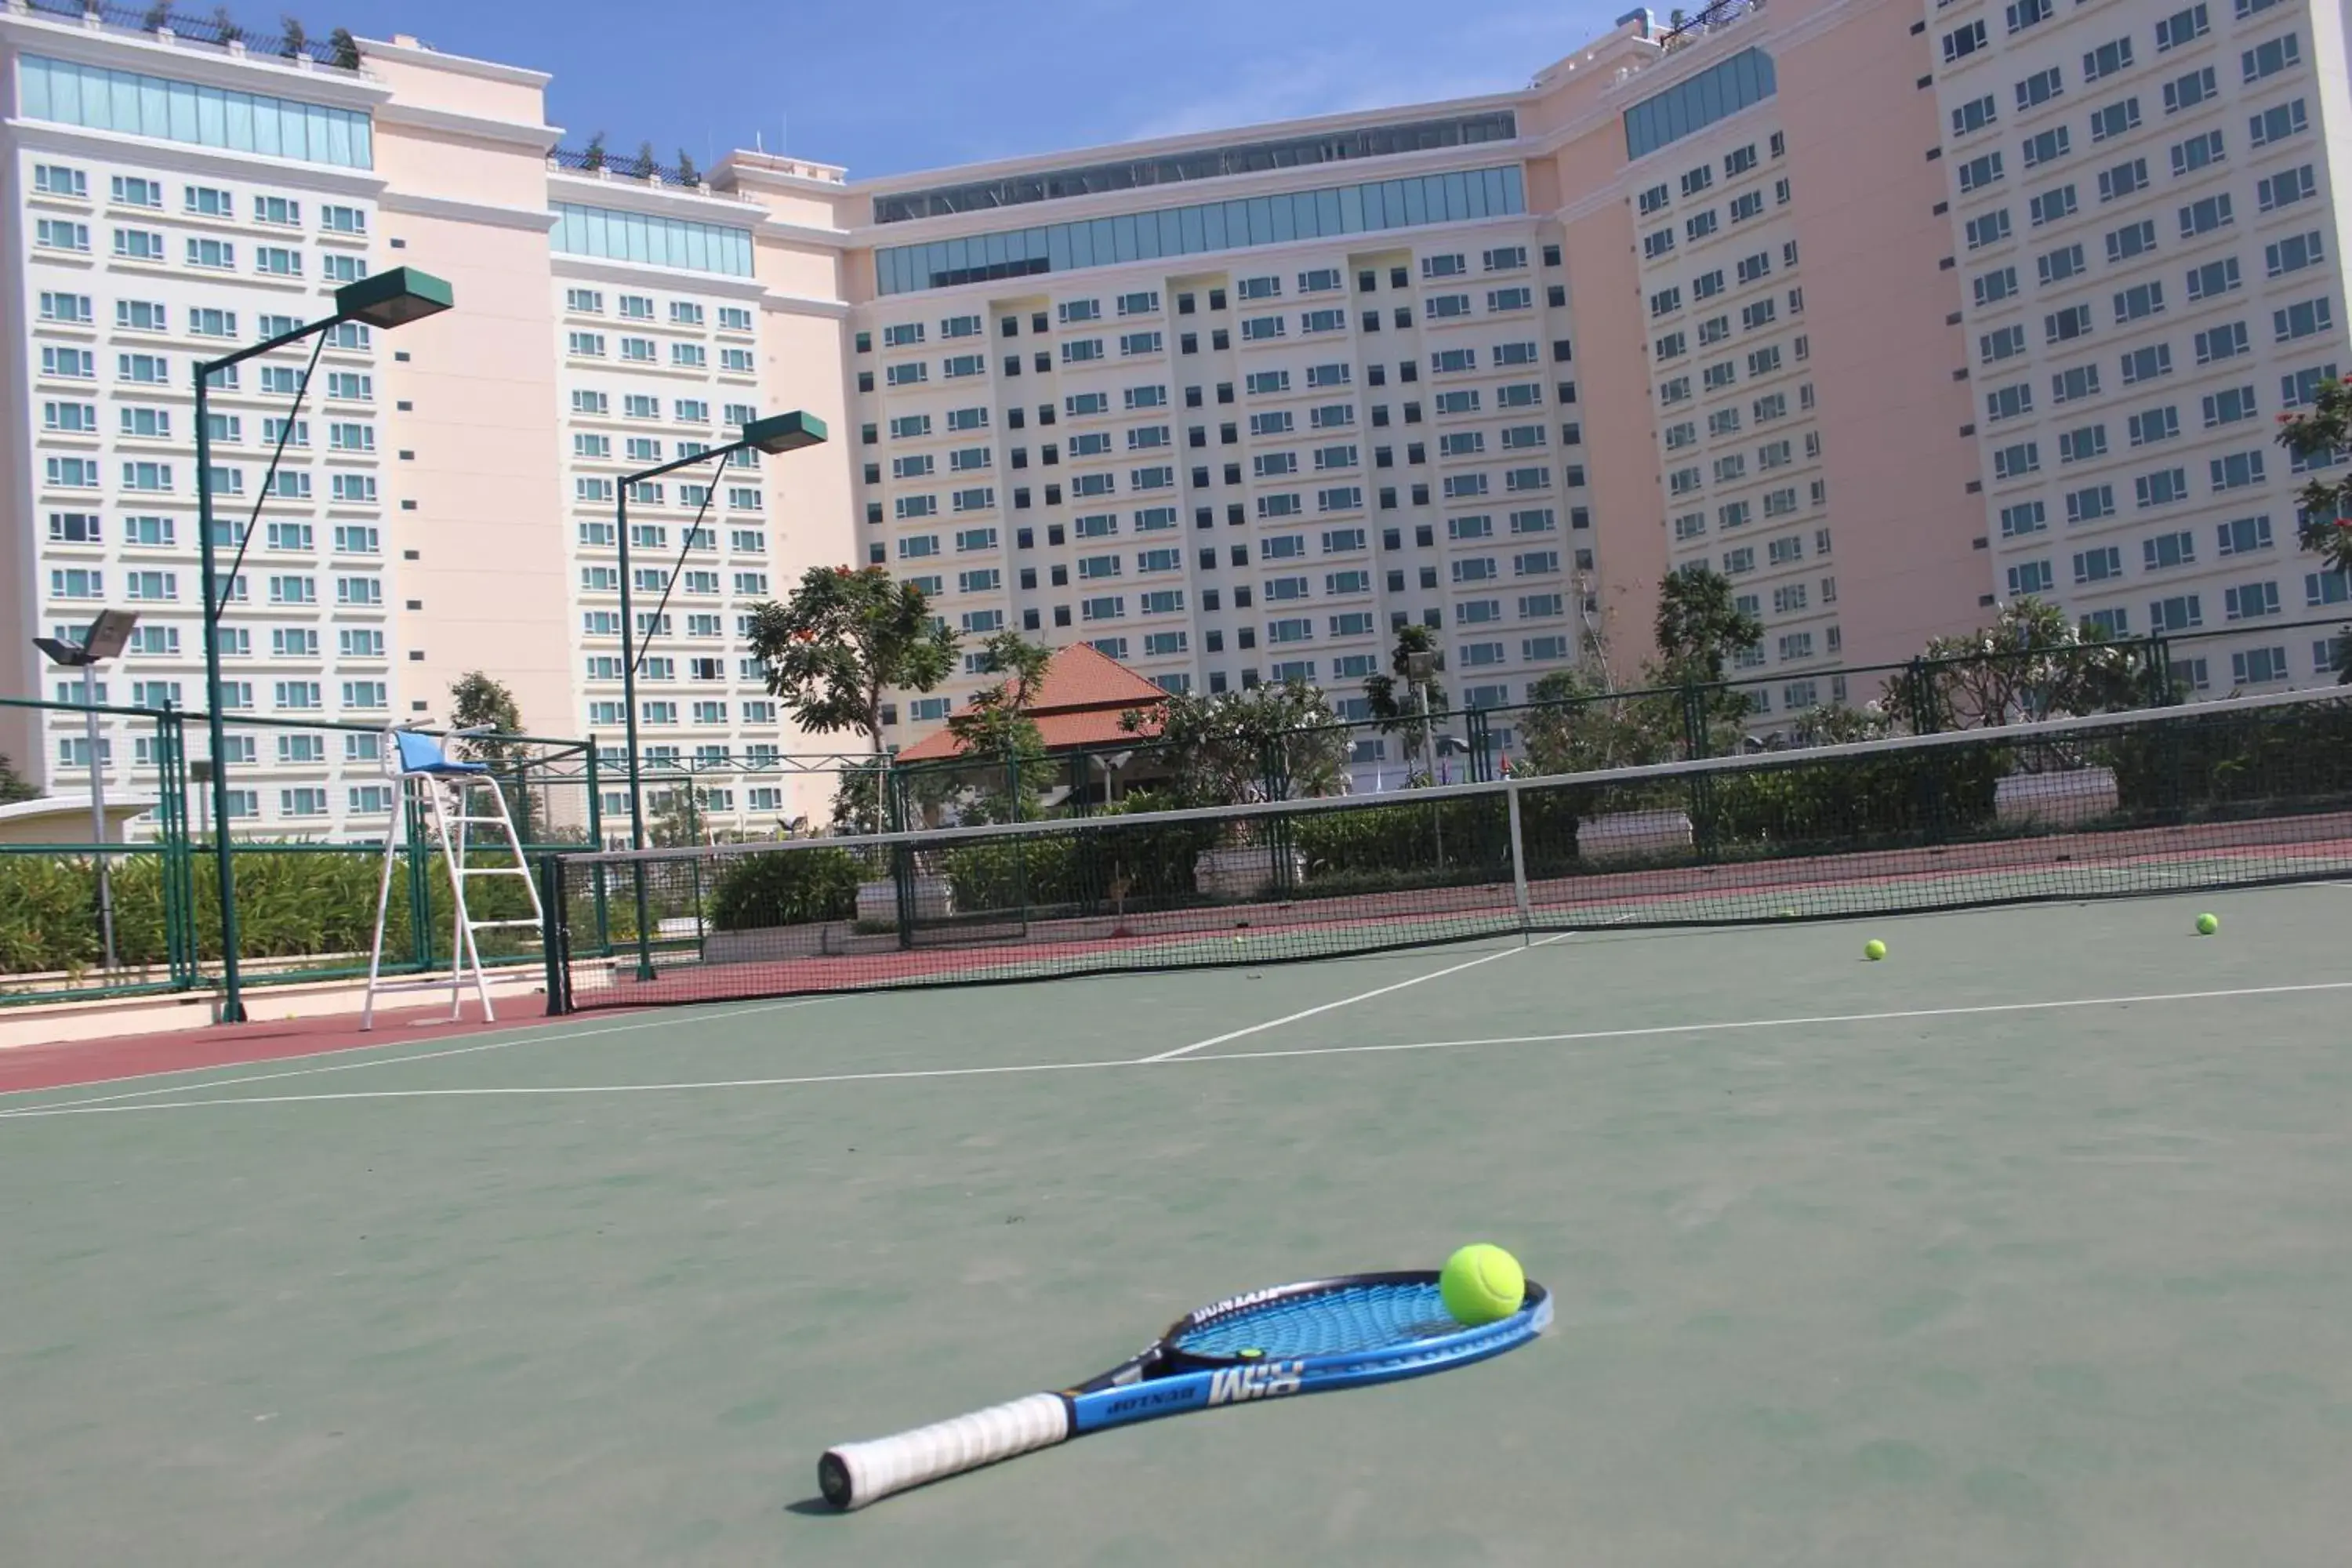 Tennis court, Other Activities in Sokha Phnom Penh Hotel